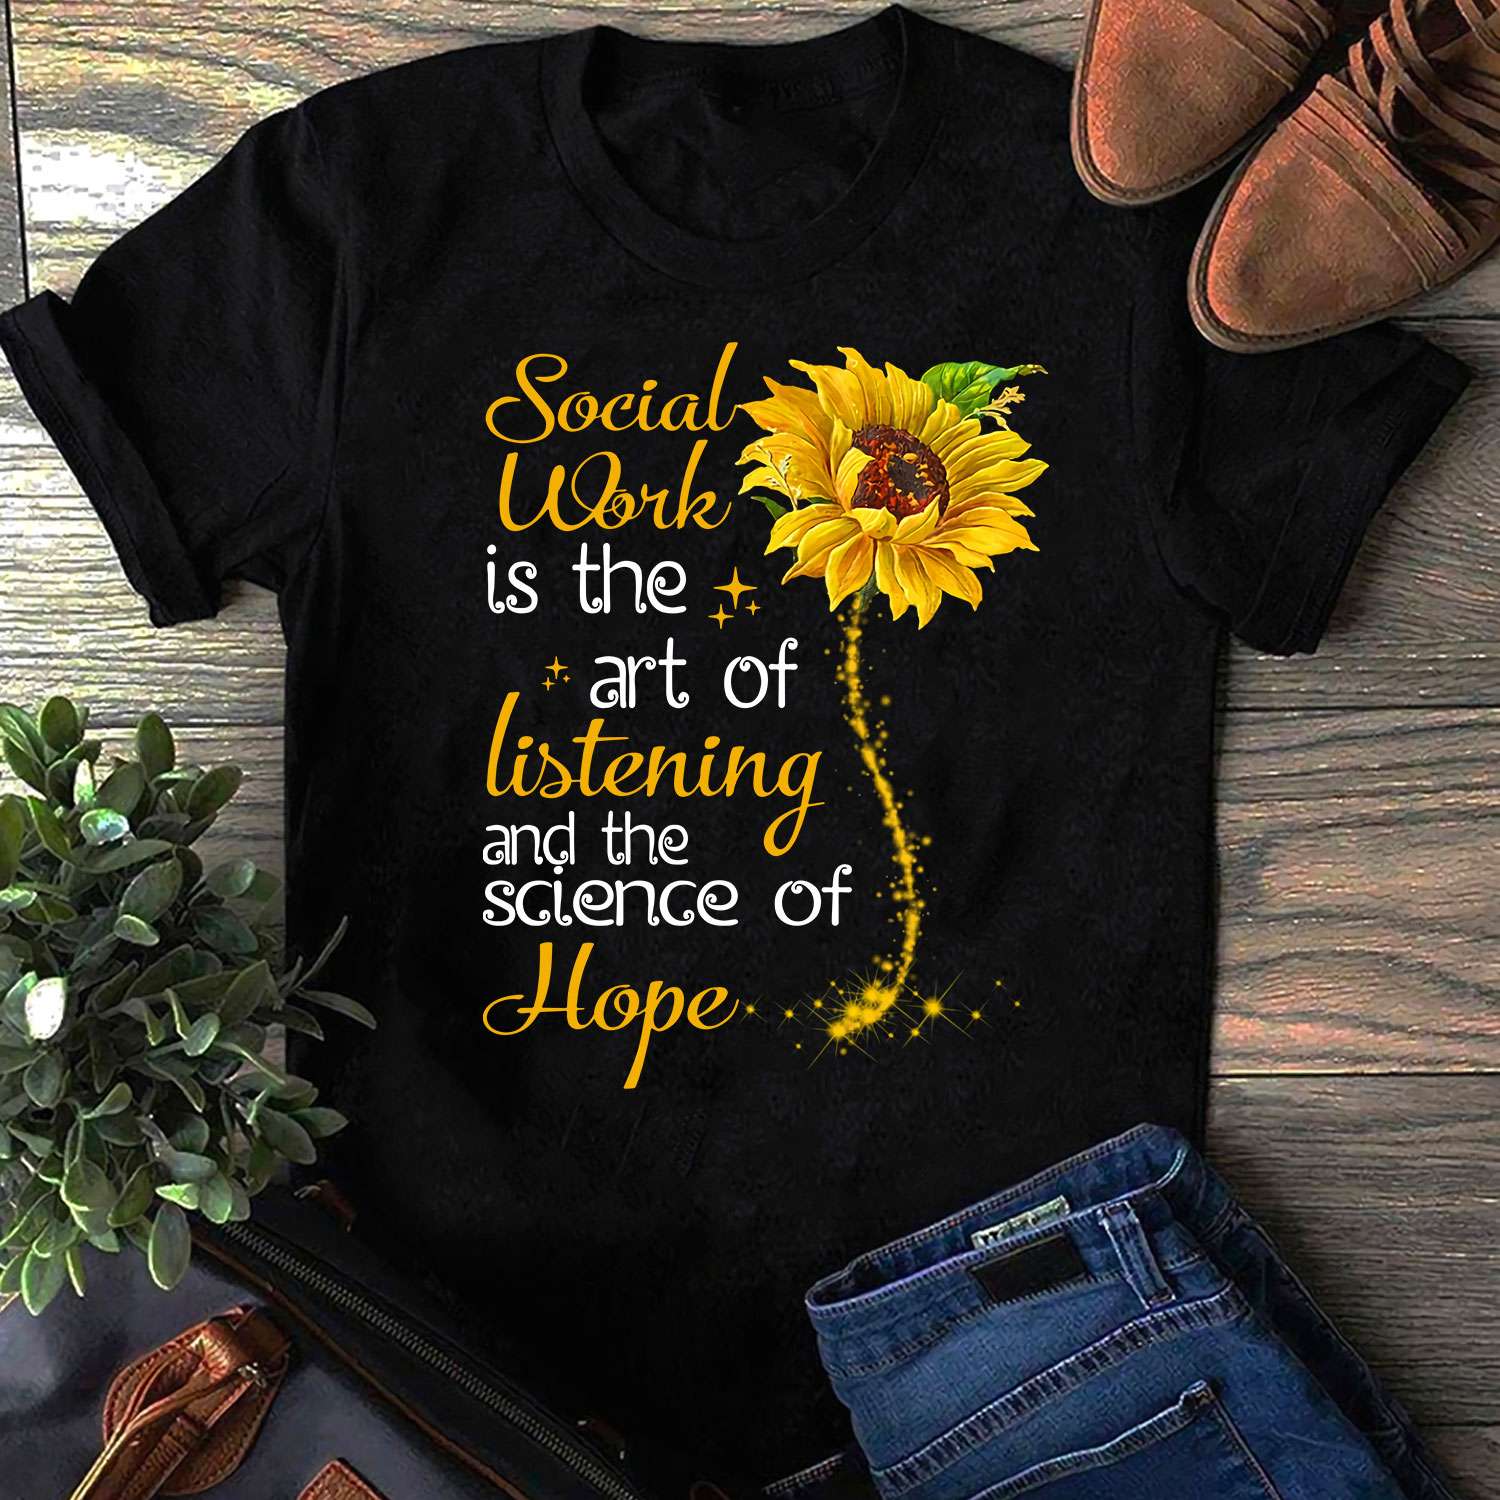 Beautiful Sunflower - Social work is the art of listening and the science of hope